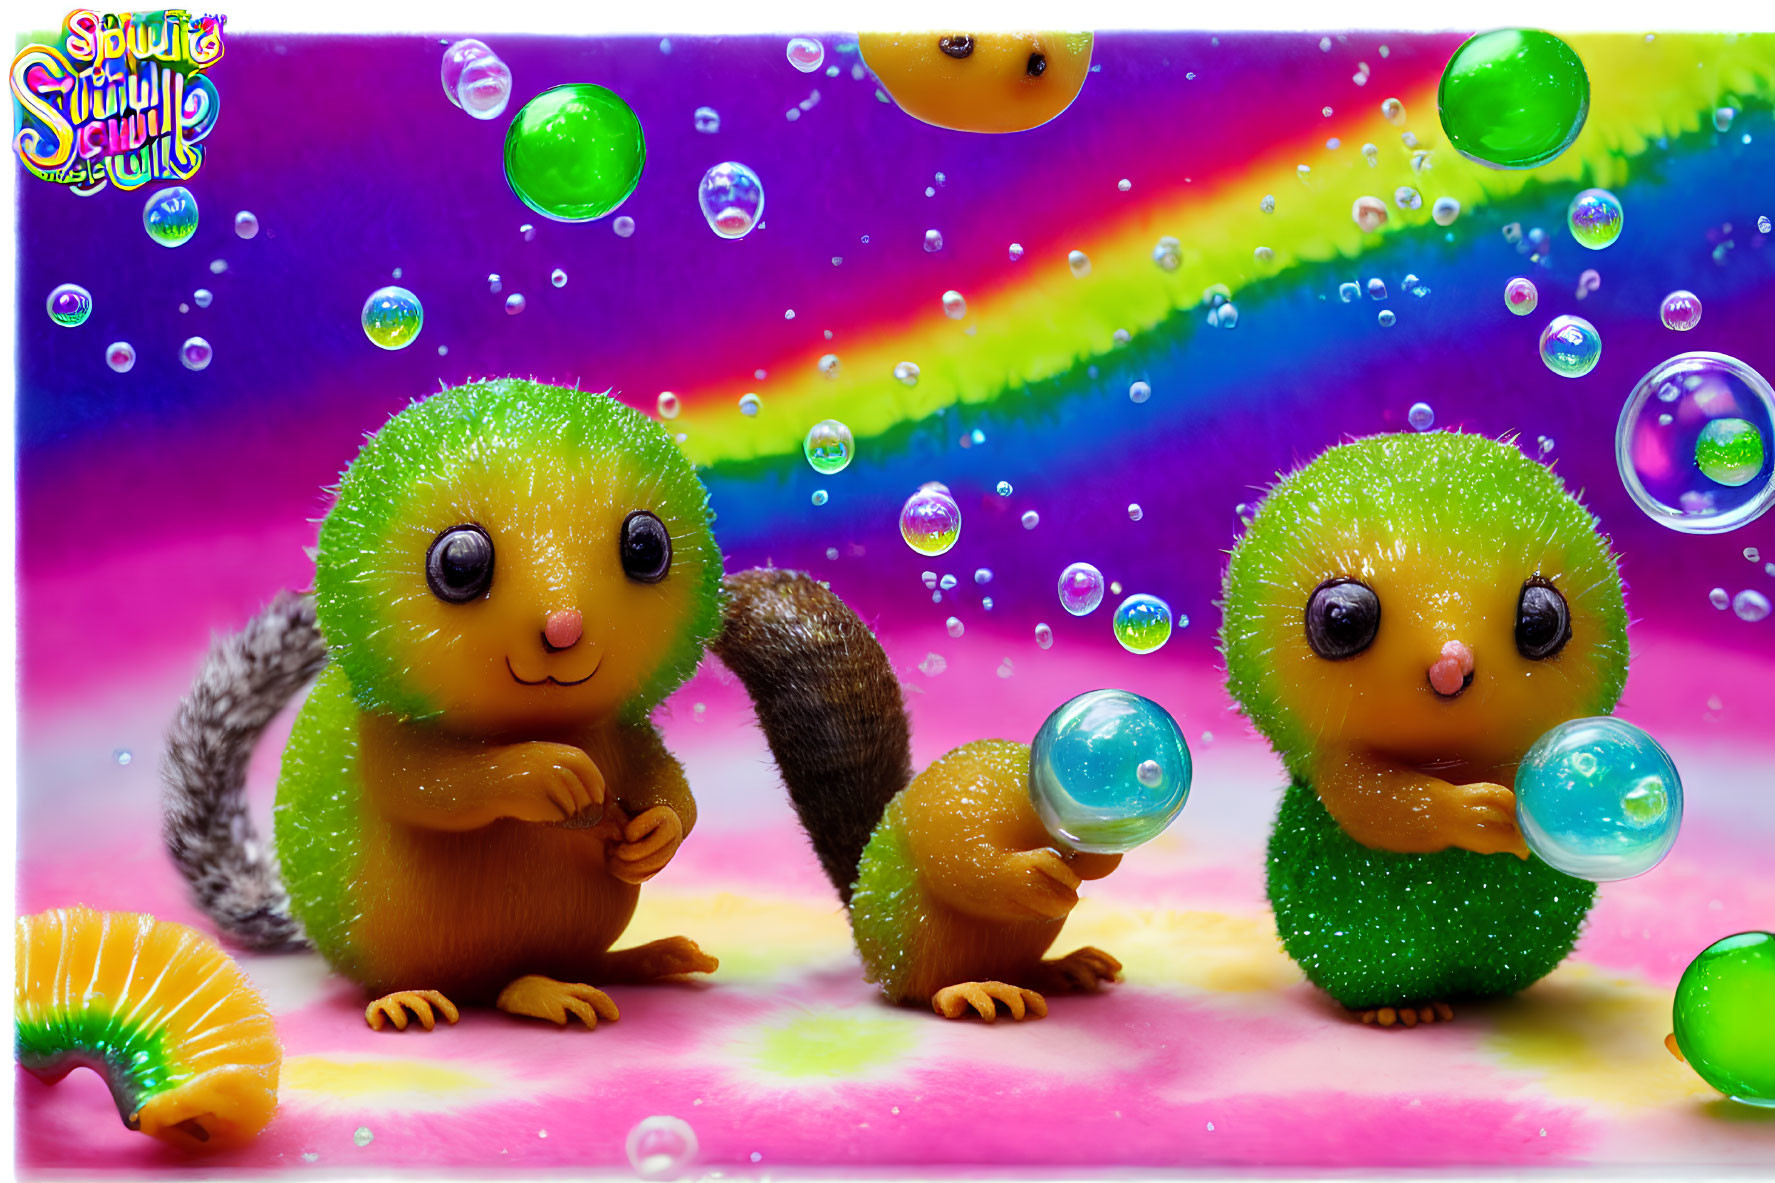 Colorful Toy Hedgehogs in Sparkly Soap Bubbles on Rainbow Background